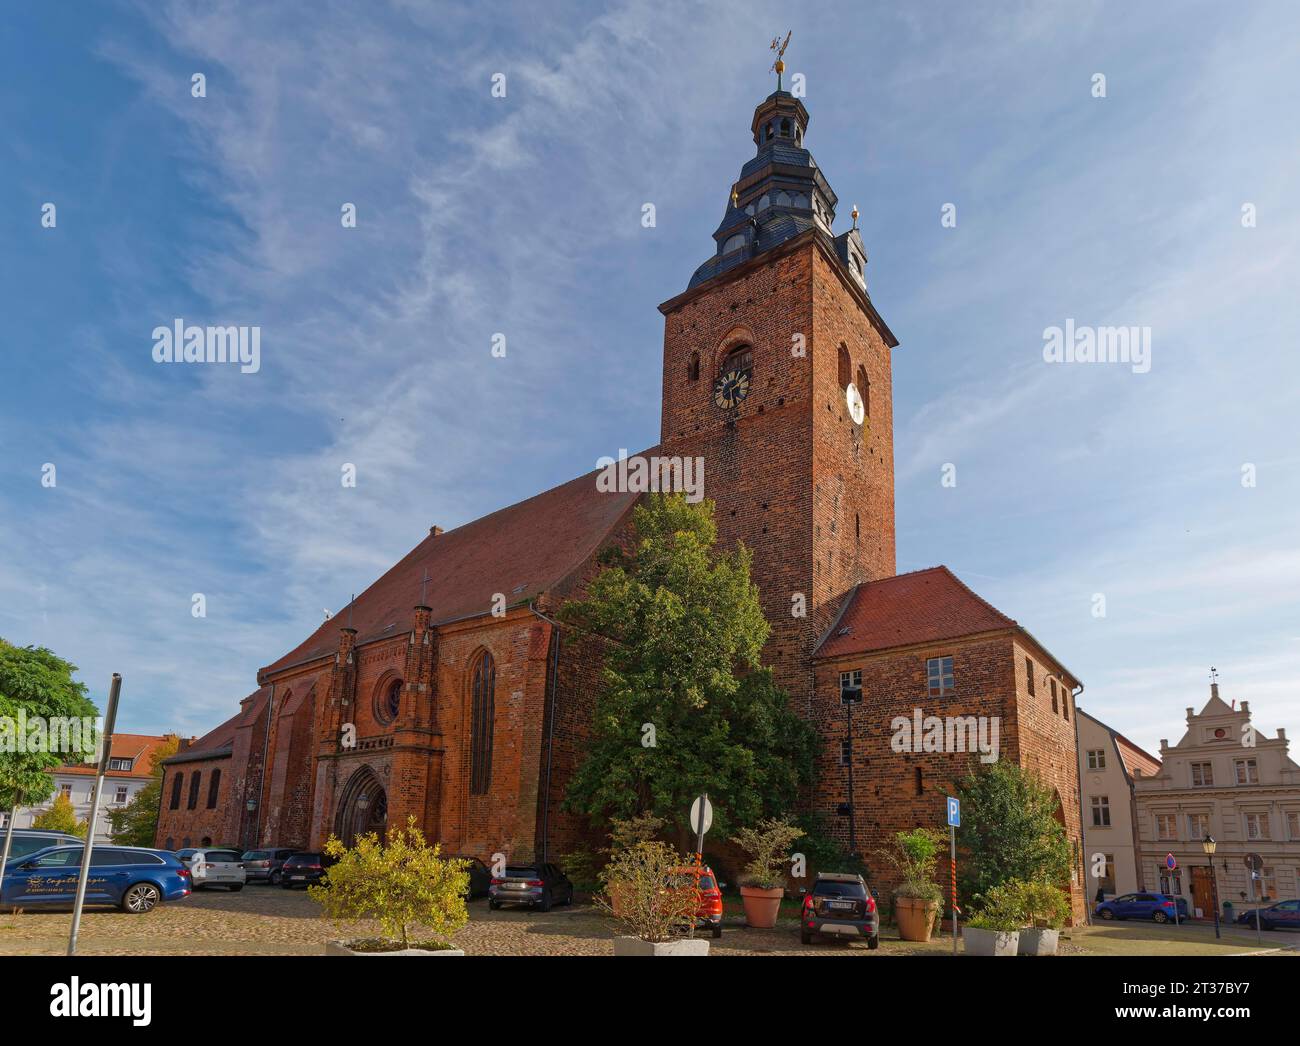 St. Laurentius town church on the Stadtinsel, the old town of the Hanseatic town of Havelberg in the Altmark region. Havelberg, Saxony-Anhalt, Germany Stock Photo